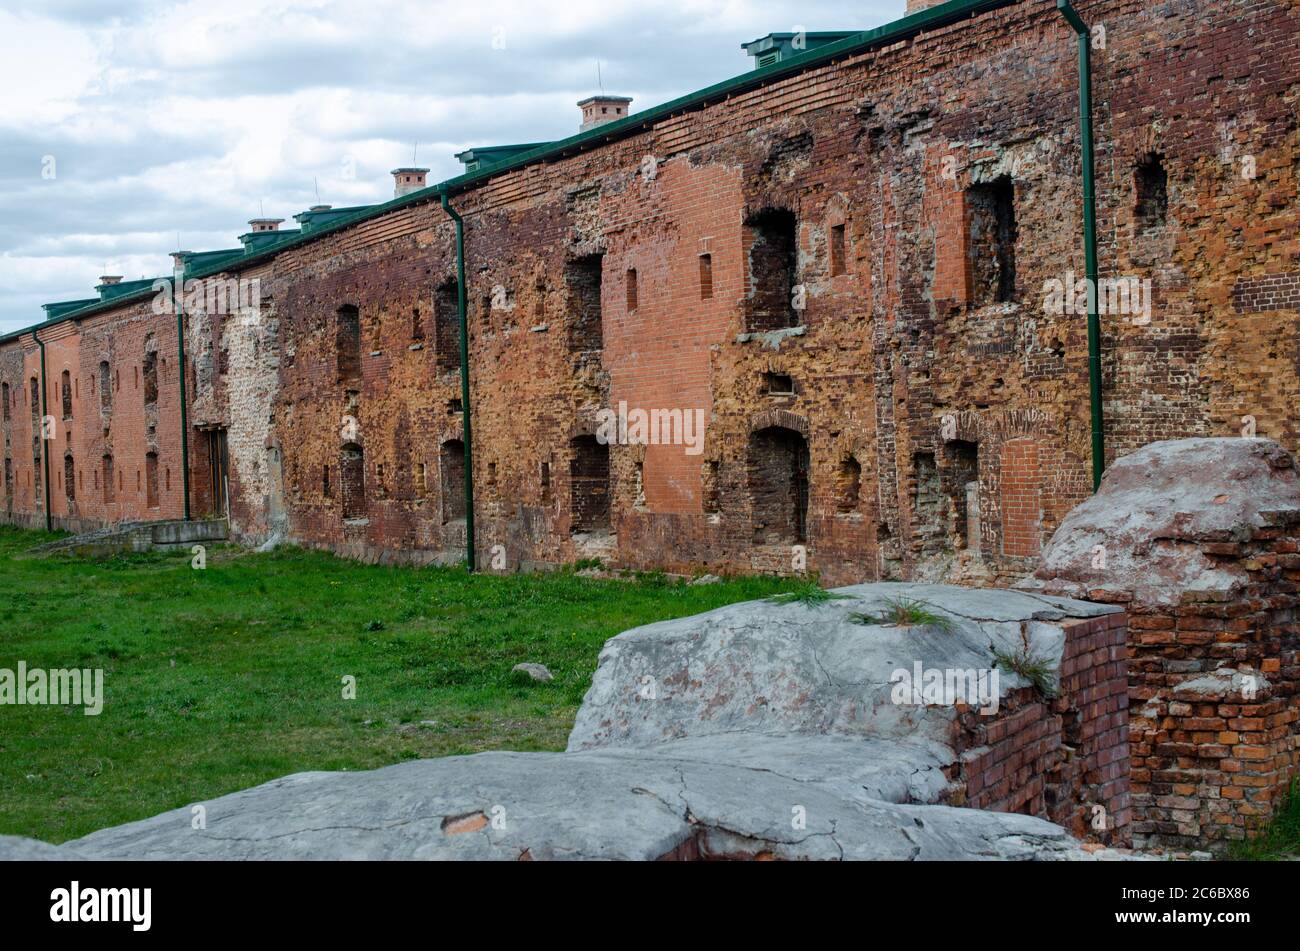 Brest, Belarus - April 18, 2020: The ruins of the Brest fortress as a reminder of the past war. Stock Photo